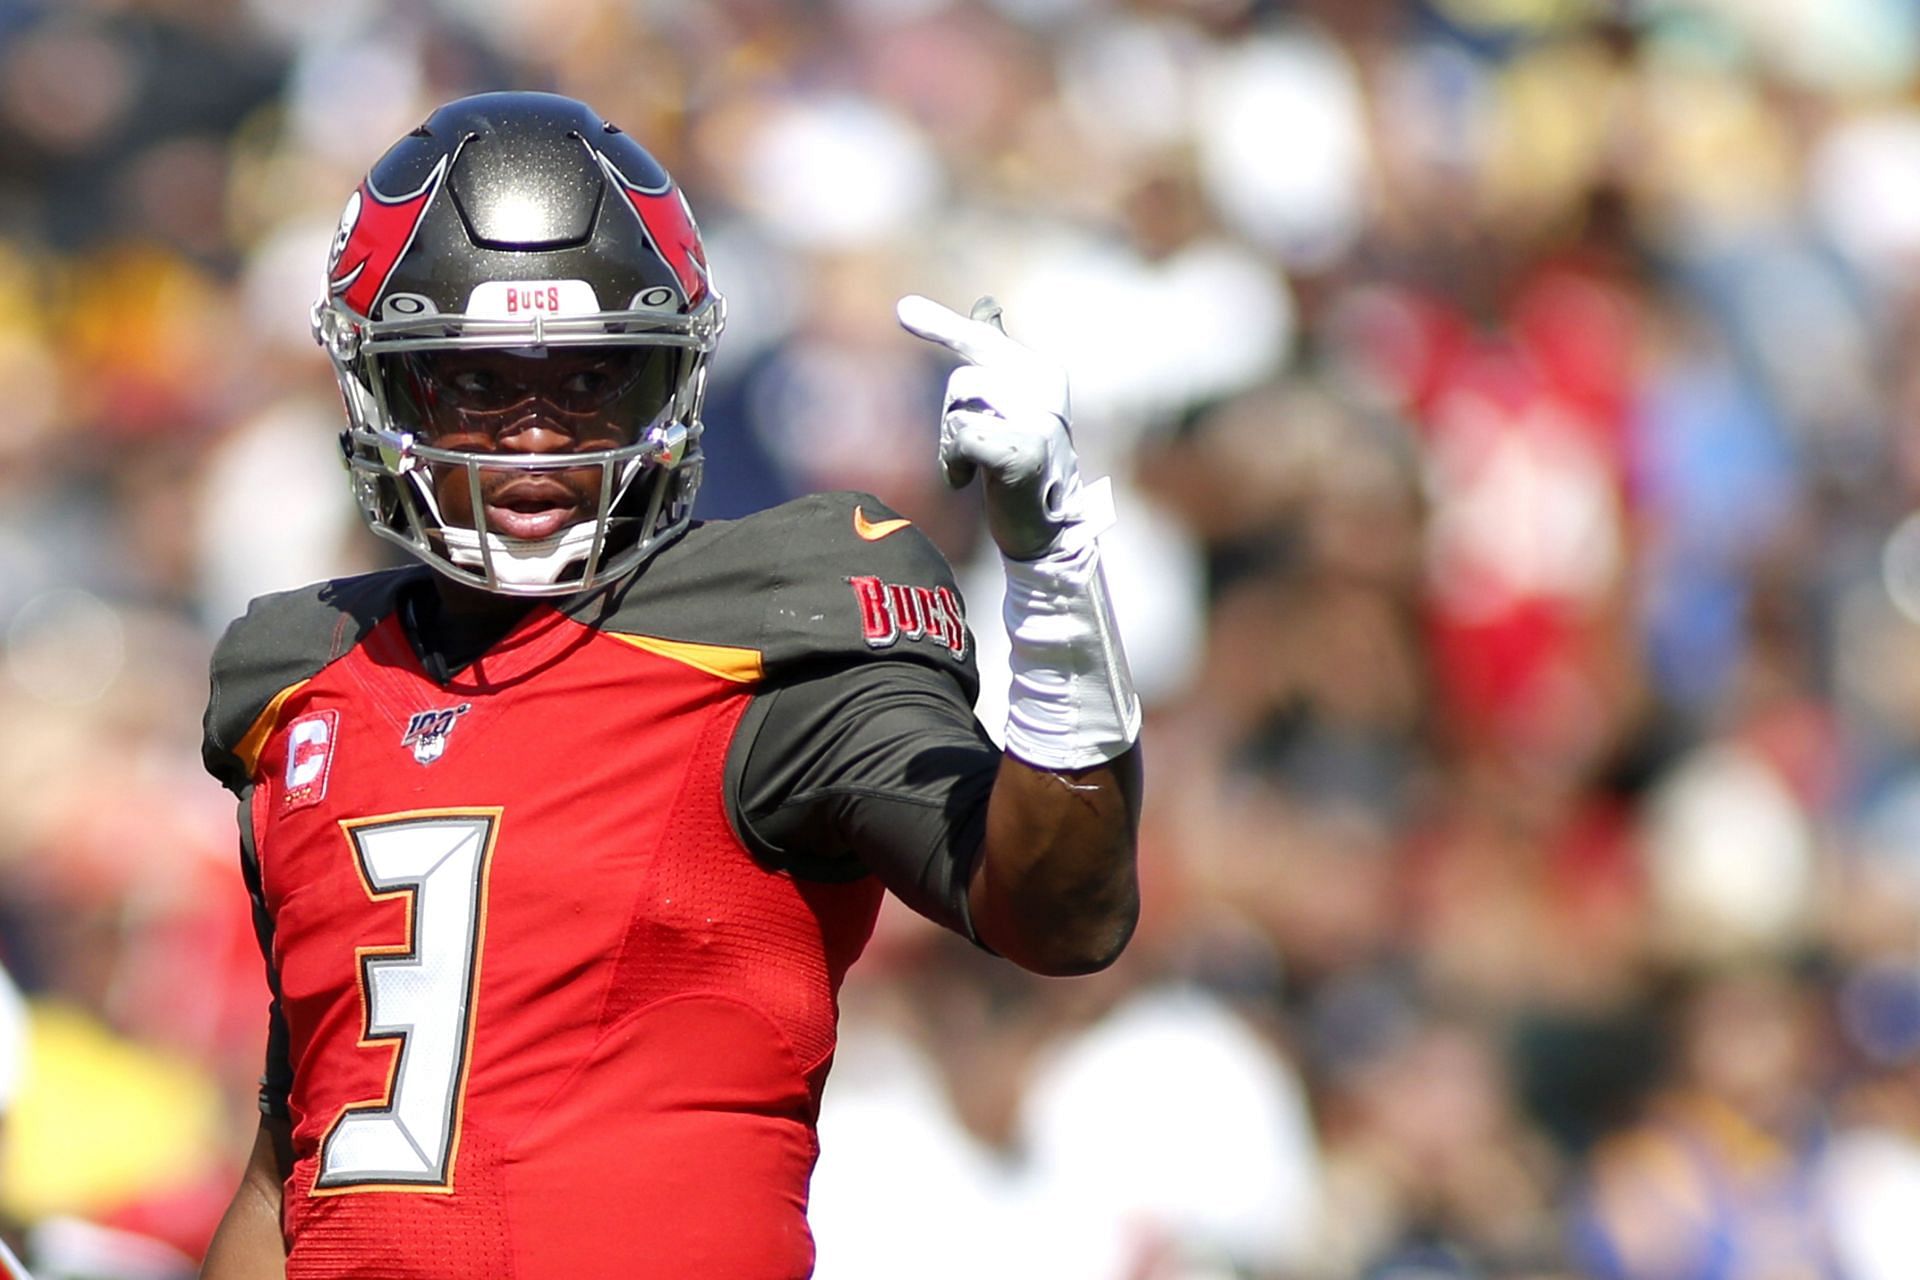 Jameis Winston played for the Bucs during this time